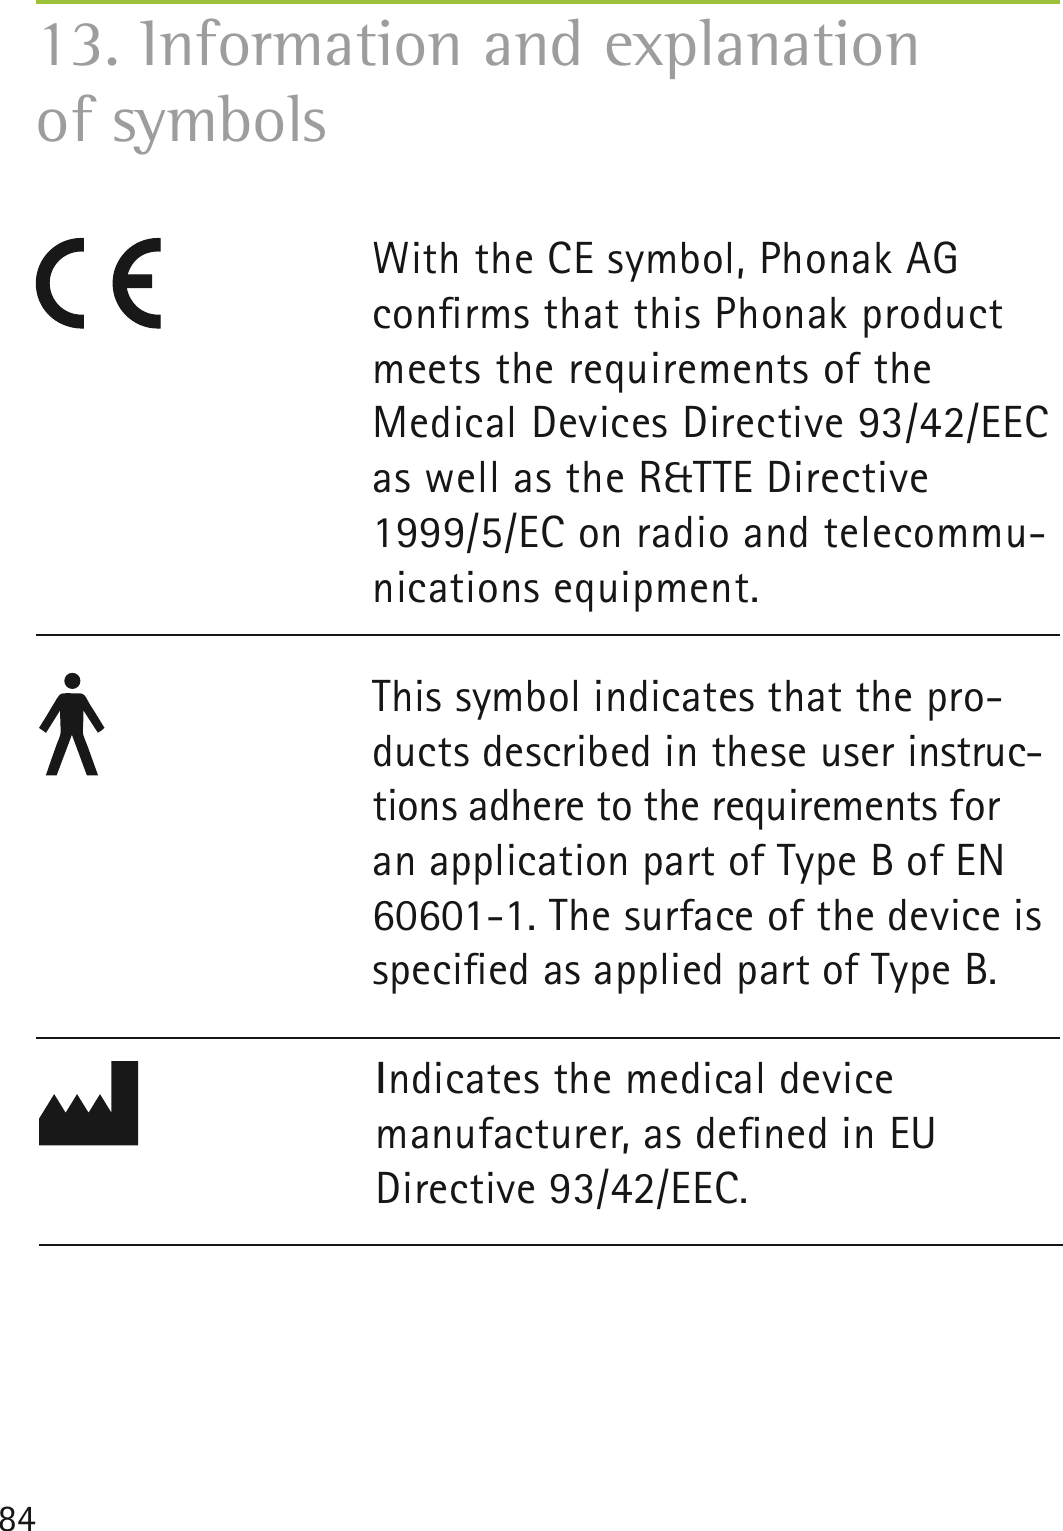 8413. Information and explanation  of symbolsWith the CE symbol, Phonak AG conﬁrms that this Phonak product meets the requirements of the Medical Devices Directive 93/42/EEC as well as the R&amp;TTE Directive 1999/5/EC on radio and telecommu-nications equipment. This symbol indicates that the pro-ducts described in these user instruc-tions adhere to the requirements for an application part of Type B of EN 60601-1. The surface of the device is speciﬁed as applied part of Type B.Indicates the medical device  manufacturer, as deﬁned in EU  Directive 93/42/EEC.